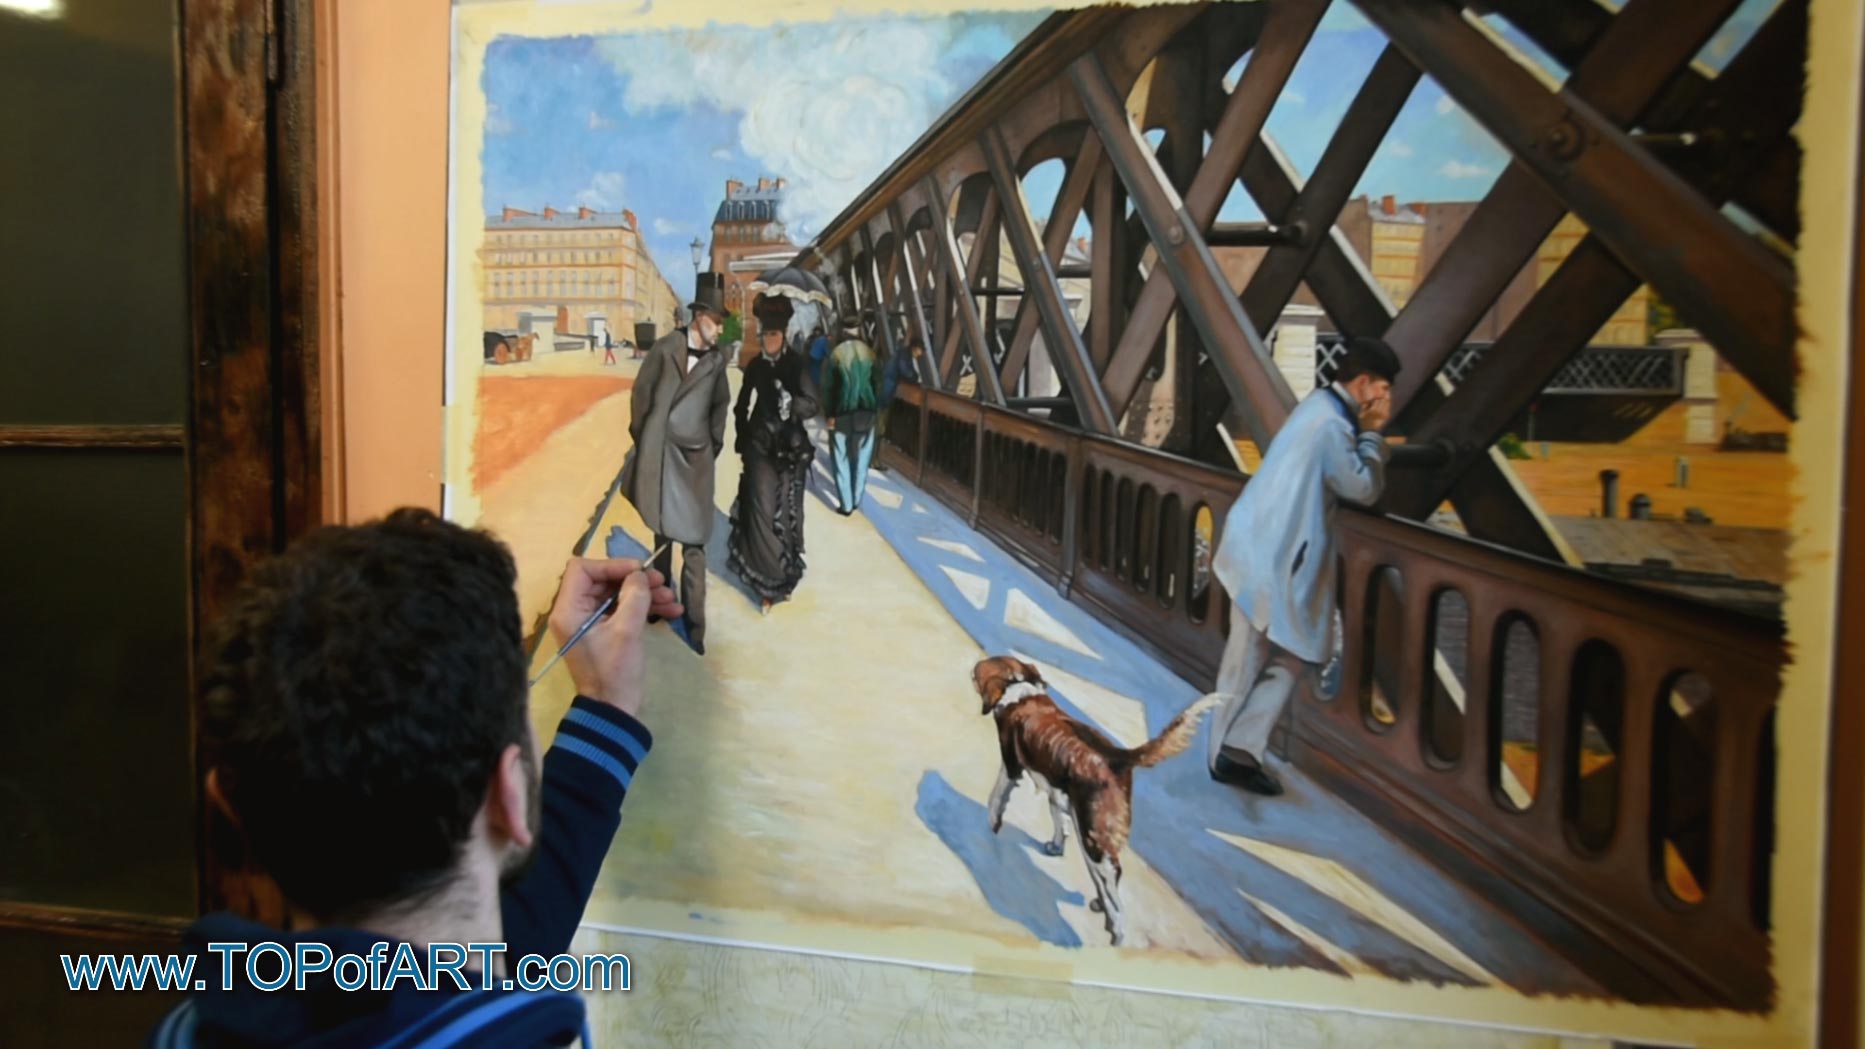 Caillebotte - "The Pont de Europe" - Process of Creation of the Painting